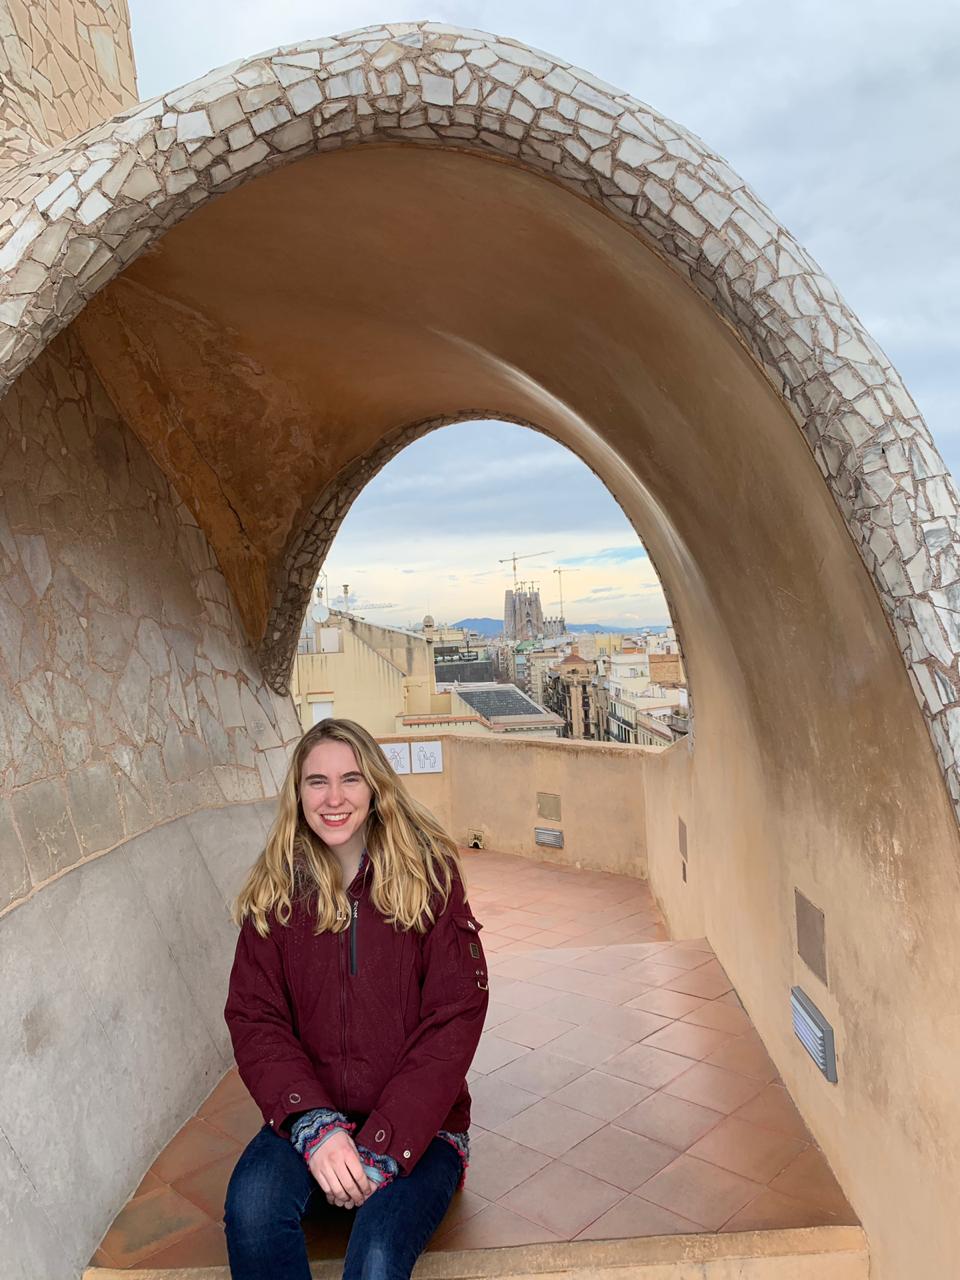 Me sitting under an arch on the roof of the Pedrera, with the Sagrada Familia in the background.